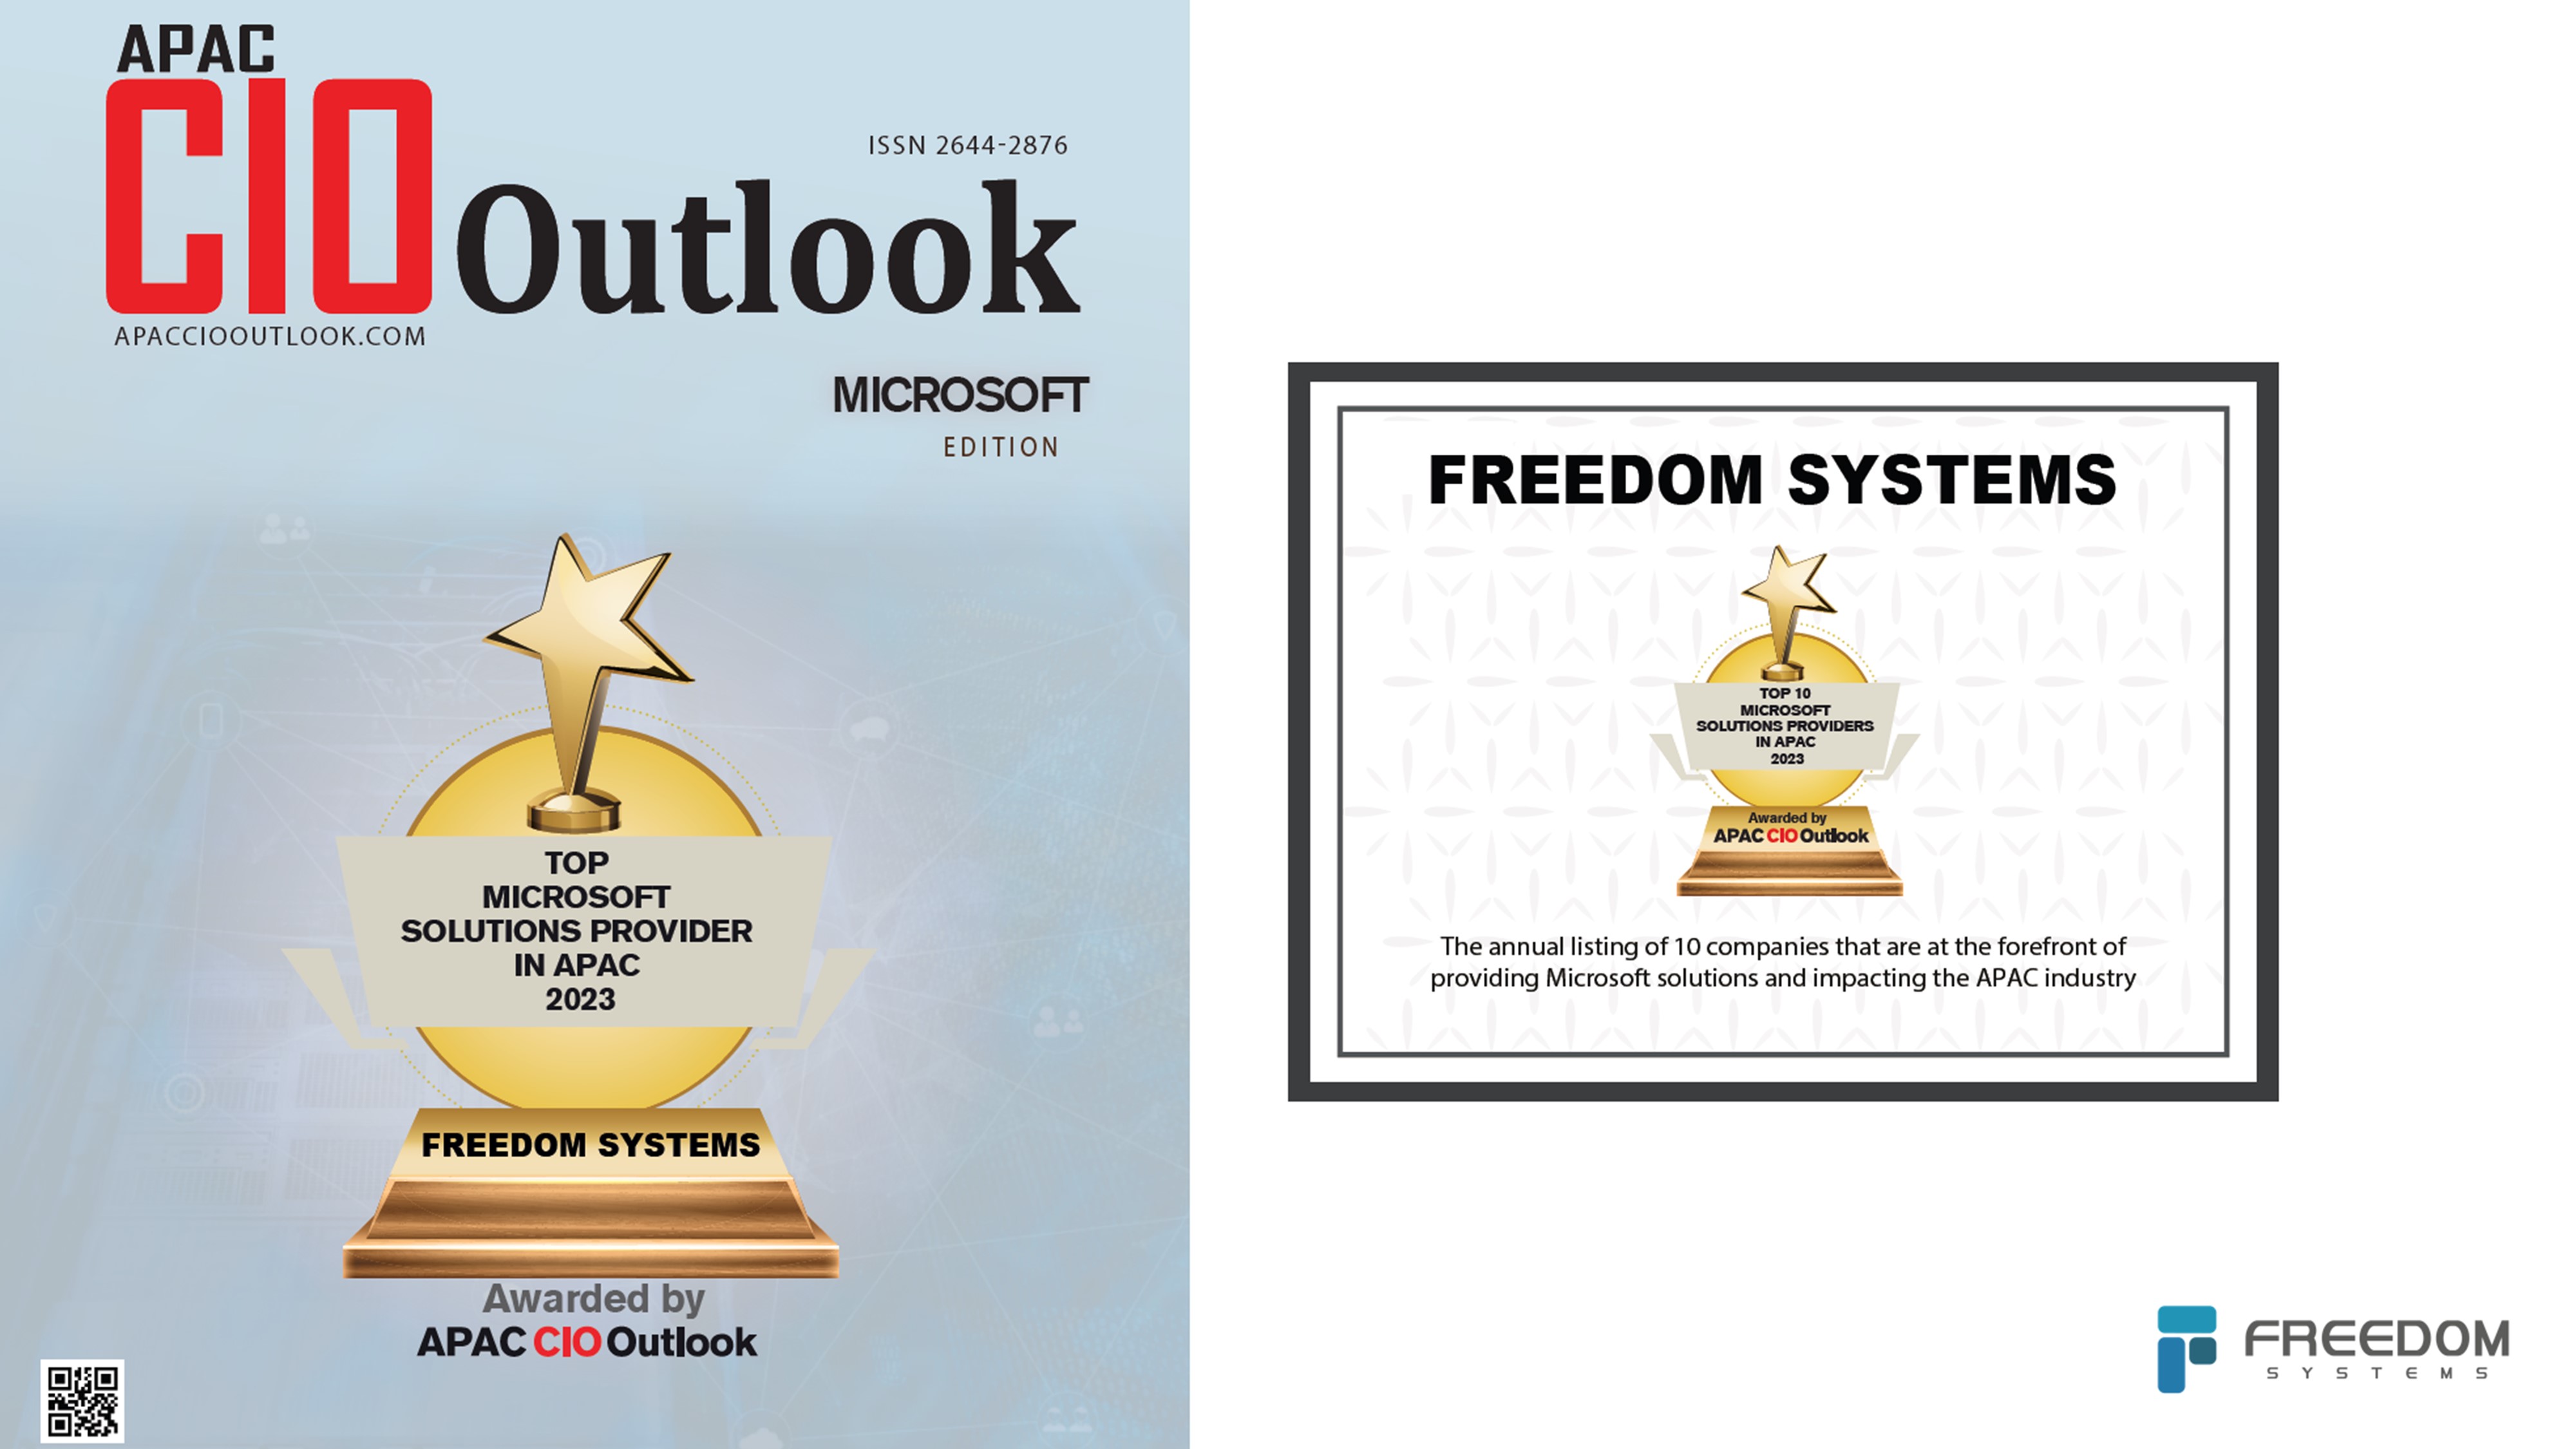 《CIOoutlook APAC》Freedom Systems: Customized IT Outsourcing Services to Reduce Operational Risks